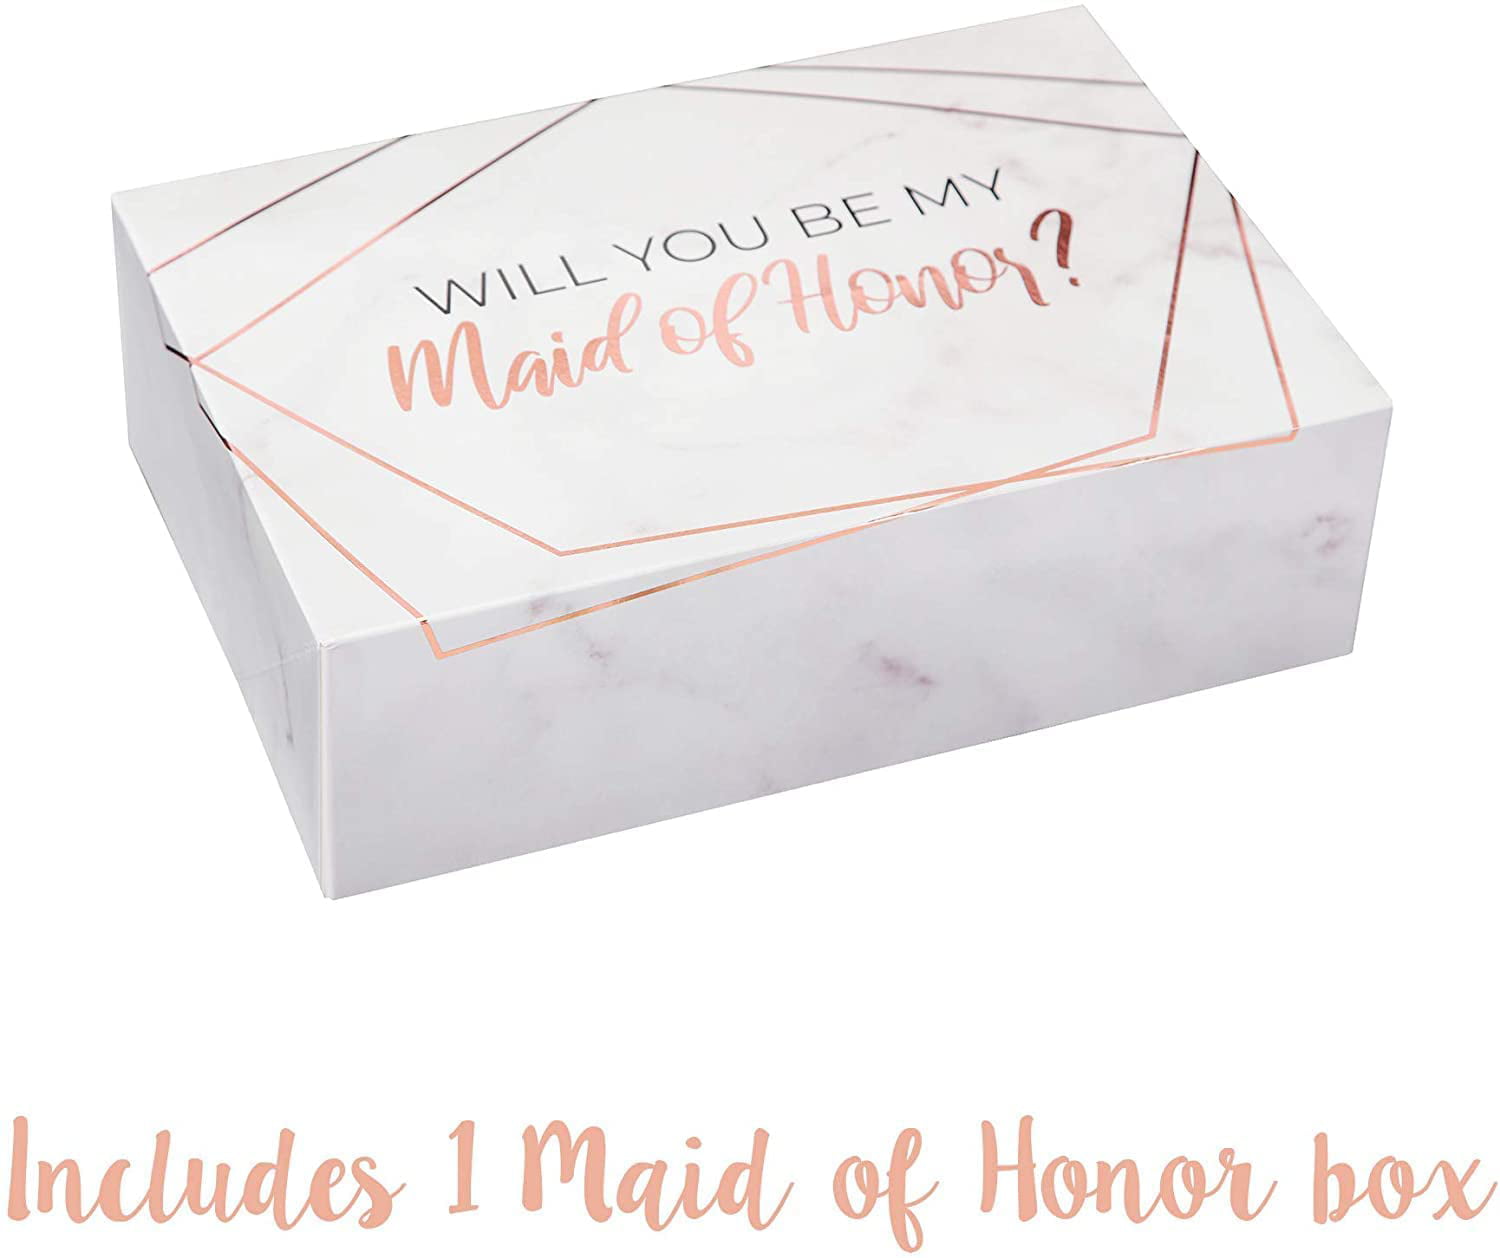 Customizable Cover Gold Foil Text and Border 8 x 8 x 3.6 Inches White 2 Bridesmaid Proposal Box and 1 Maid of Honor Proposal Gift Box MOH Presents Perfect for Will You Be My Bridesmaid